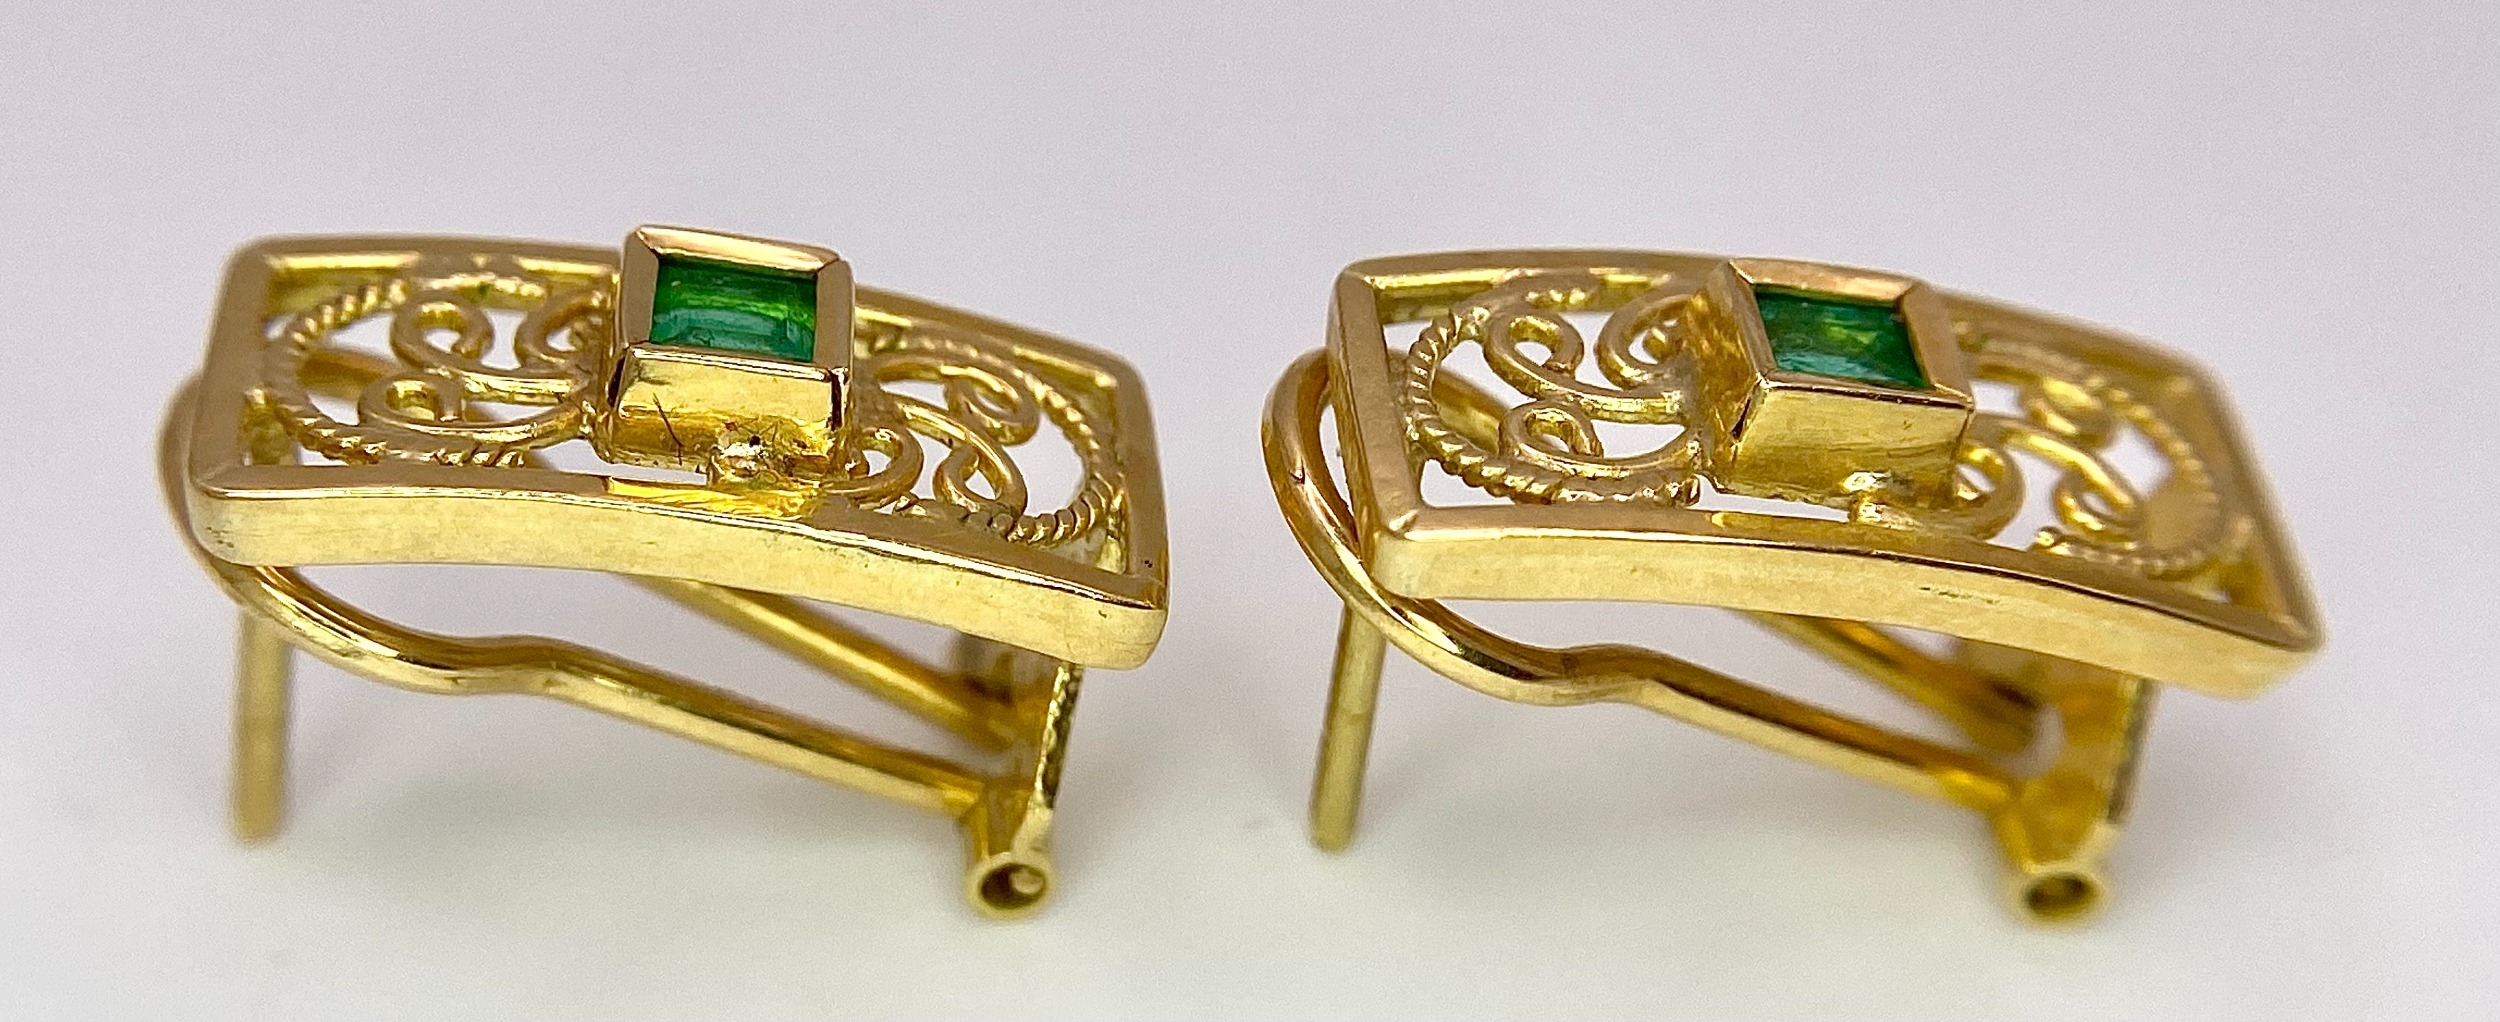 A Pair of 18K Yellow Gold and Emerald Earrings. Clip clasp with pierced decoration. 17mm. 3.9g total - Image 3 of 7